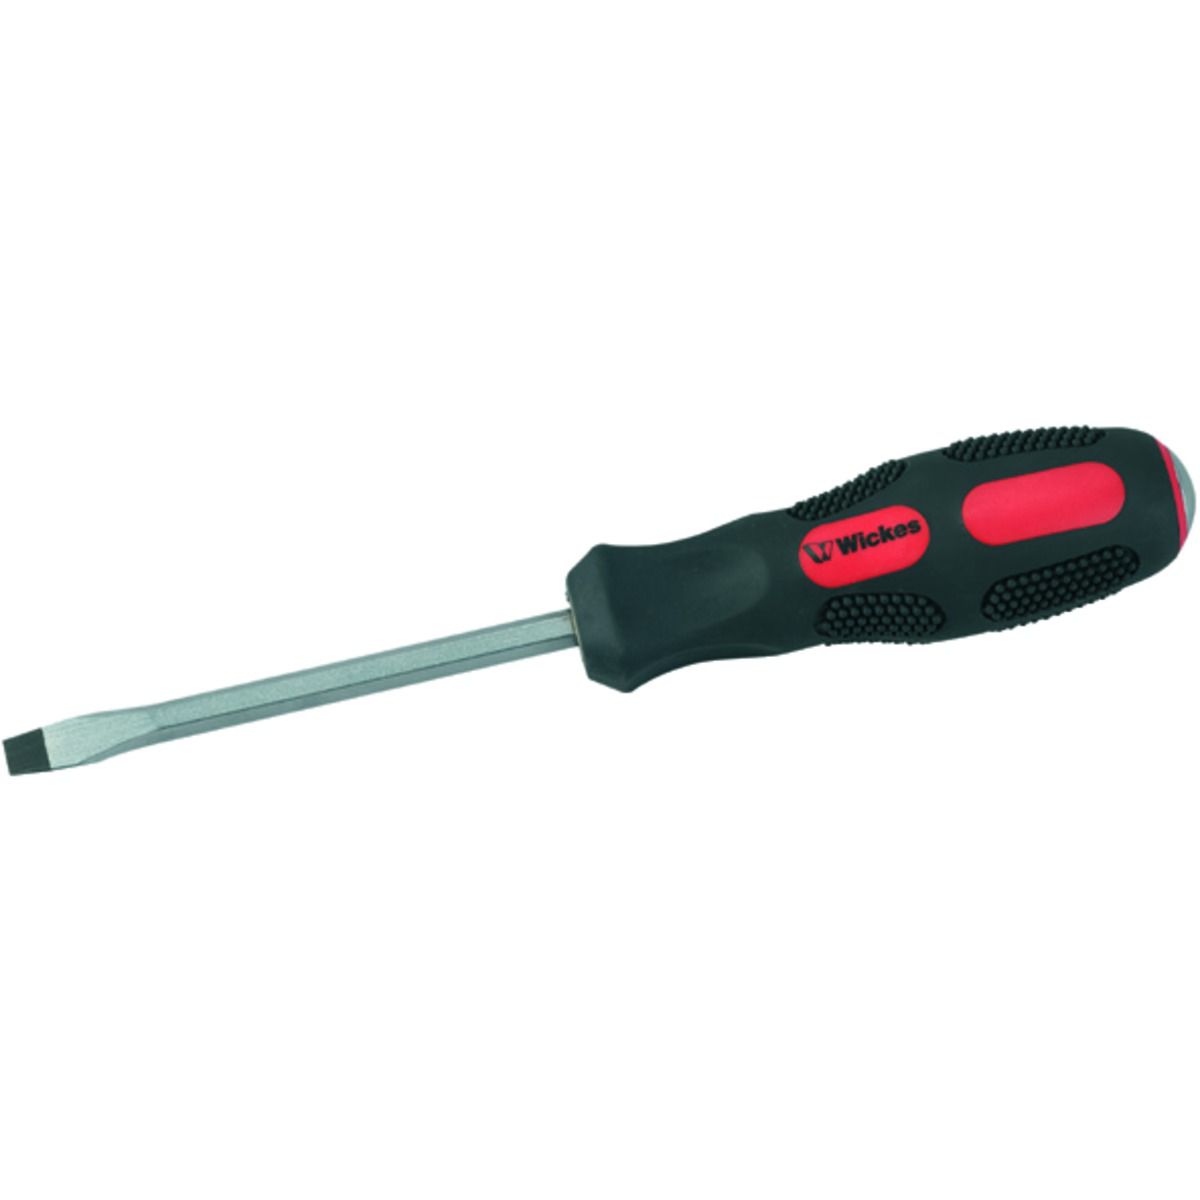 Image of Wickes 6mm Soft Grip Slotted Screwdriver - 100mm